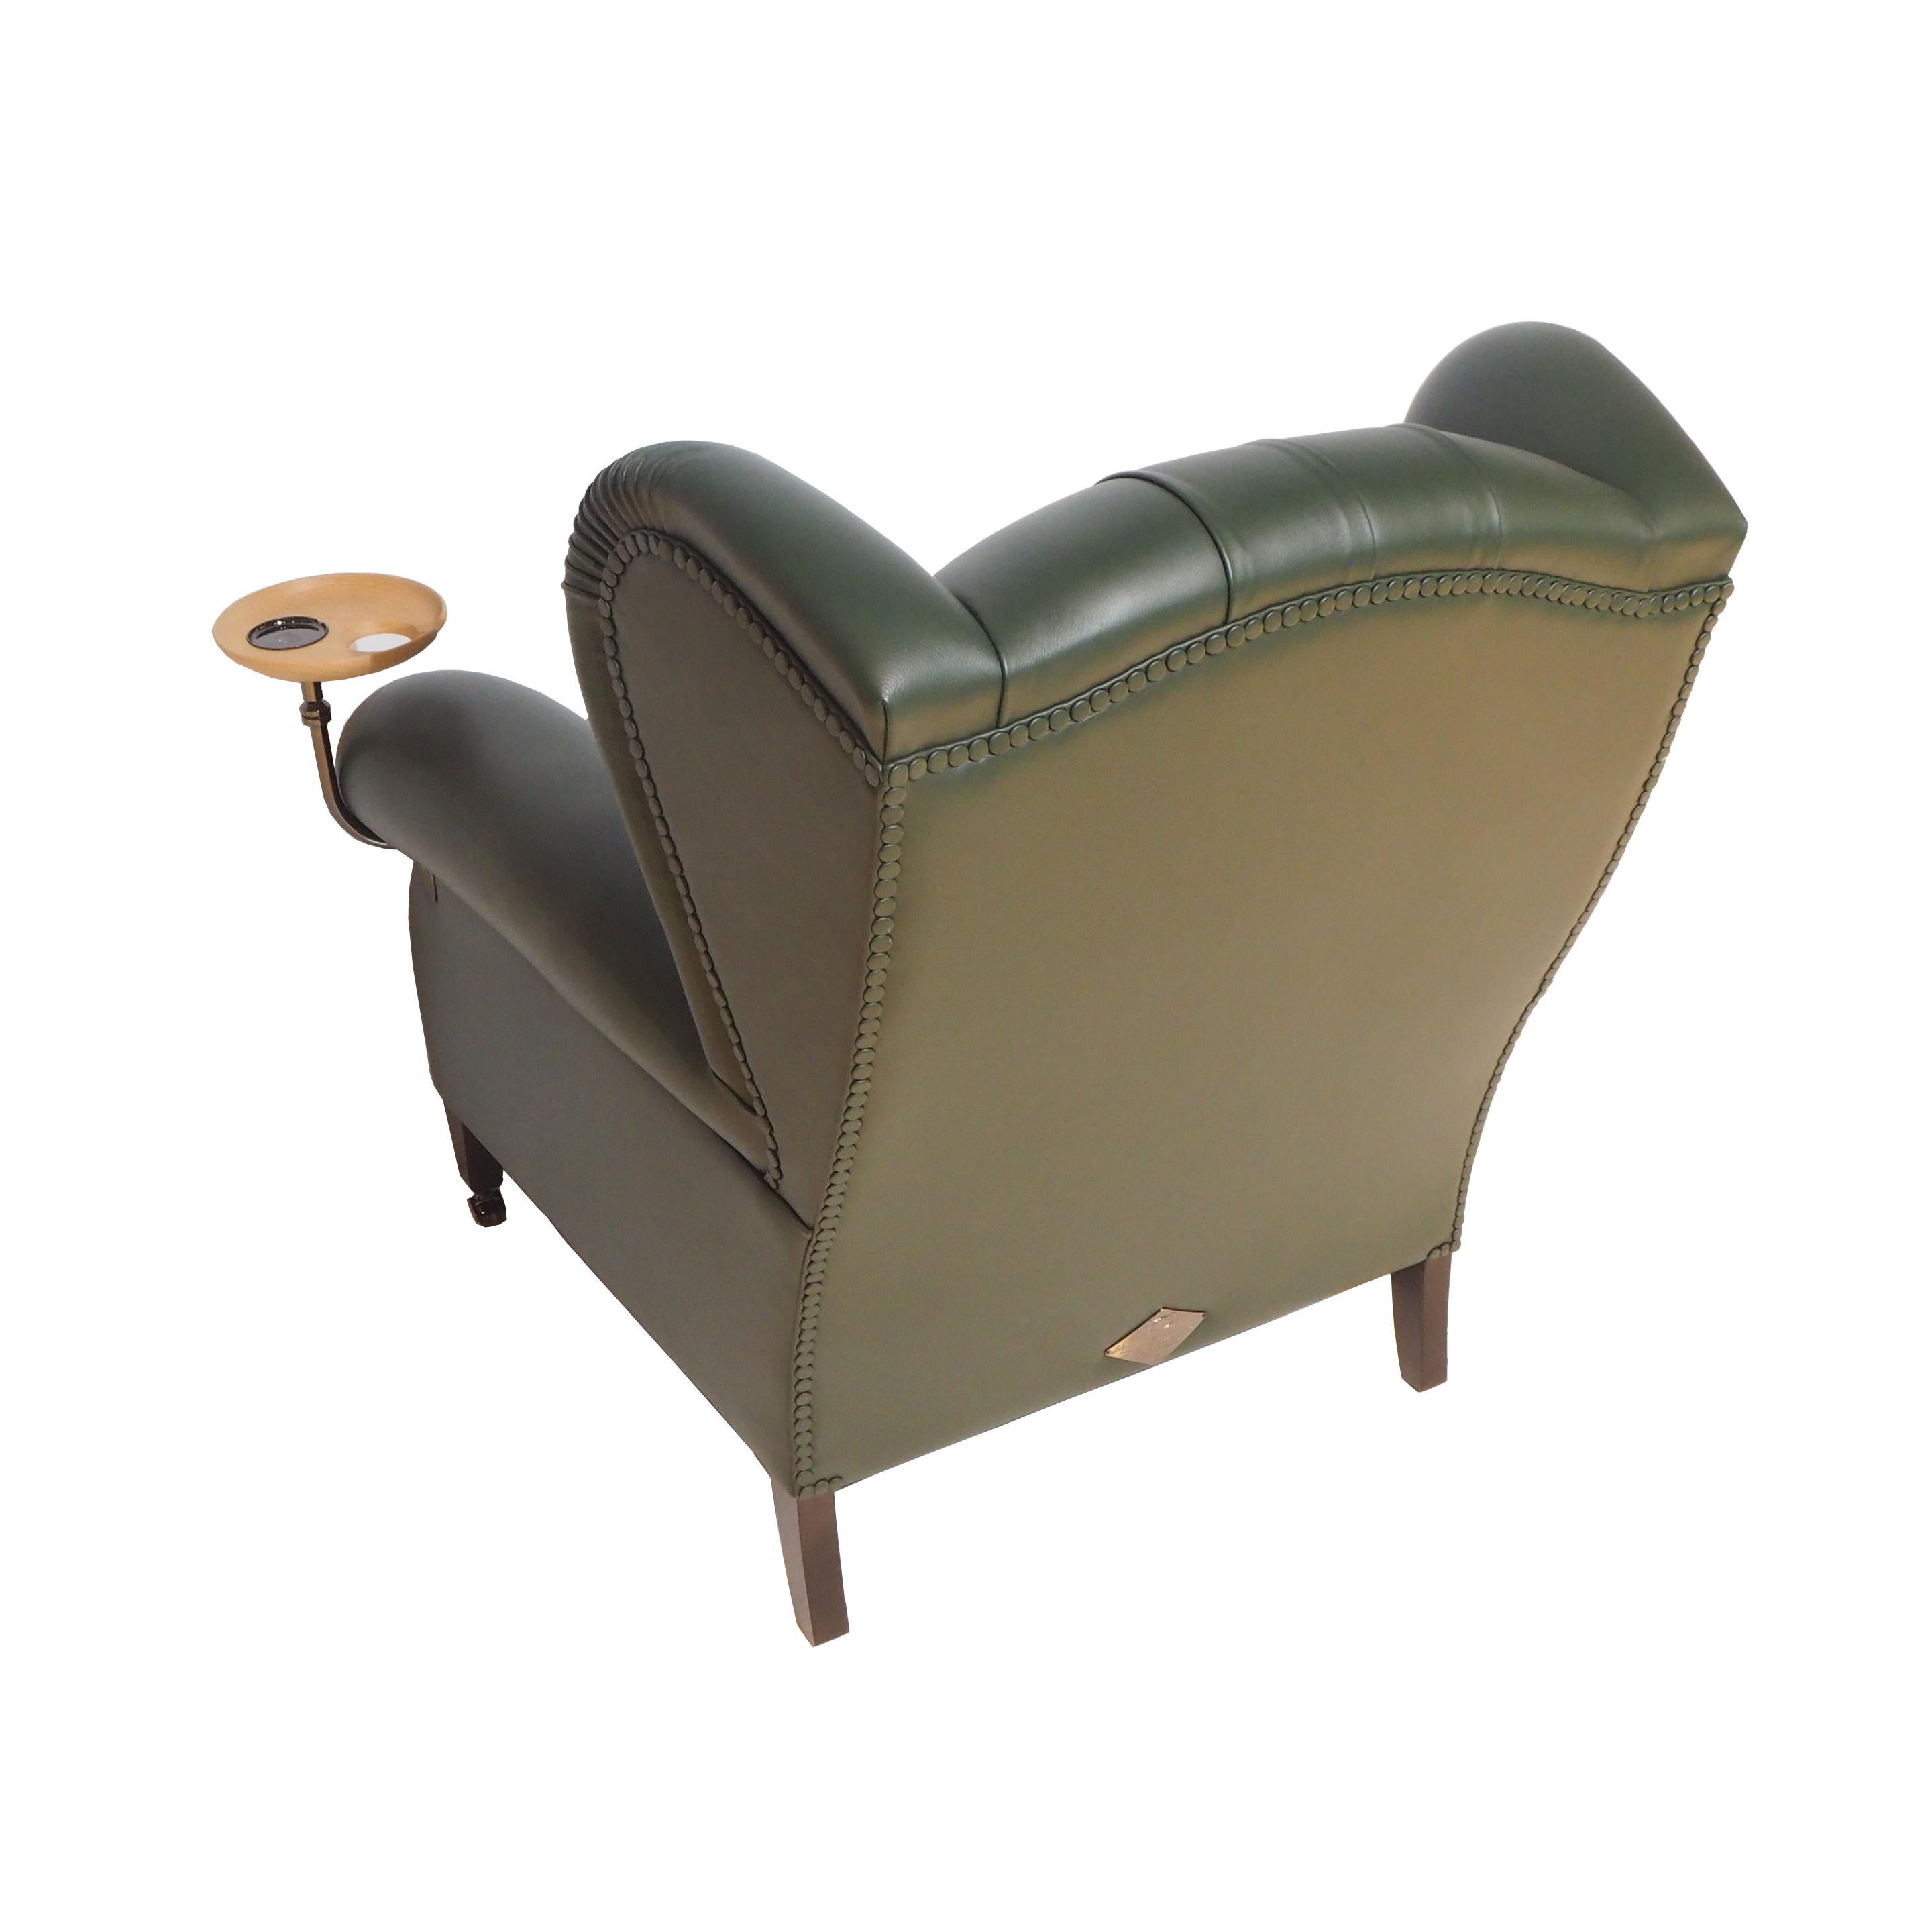 Rococo 1919 Armchair Bergere Model in Pelle SC 178 Alpi Leather with Cup Holder